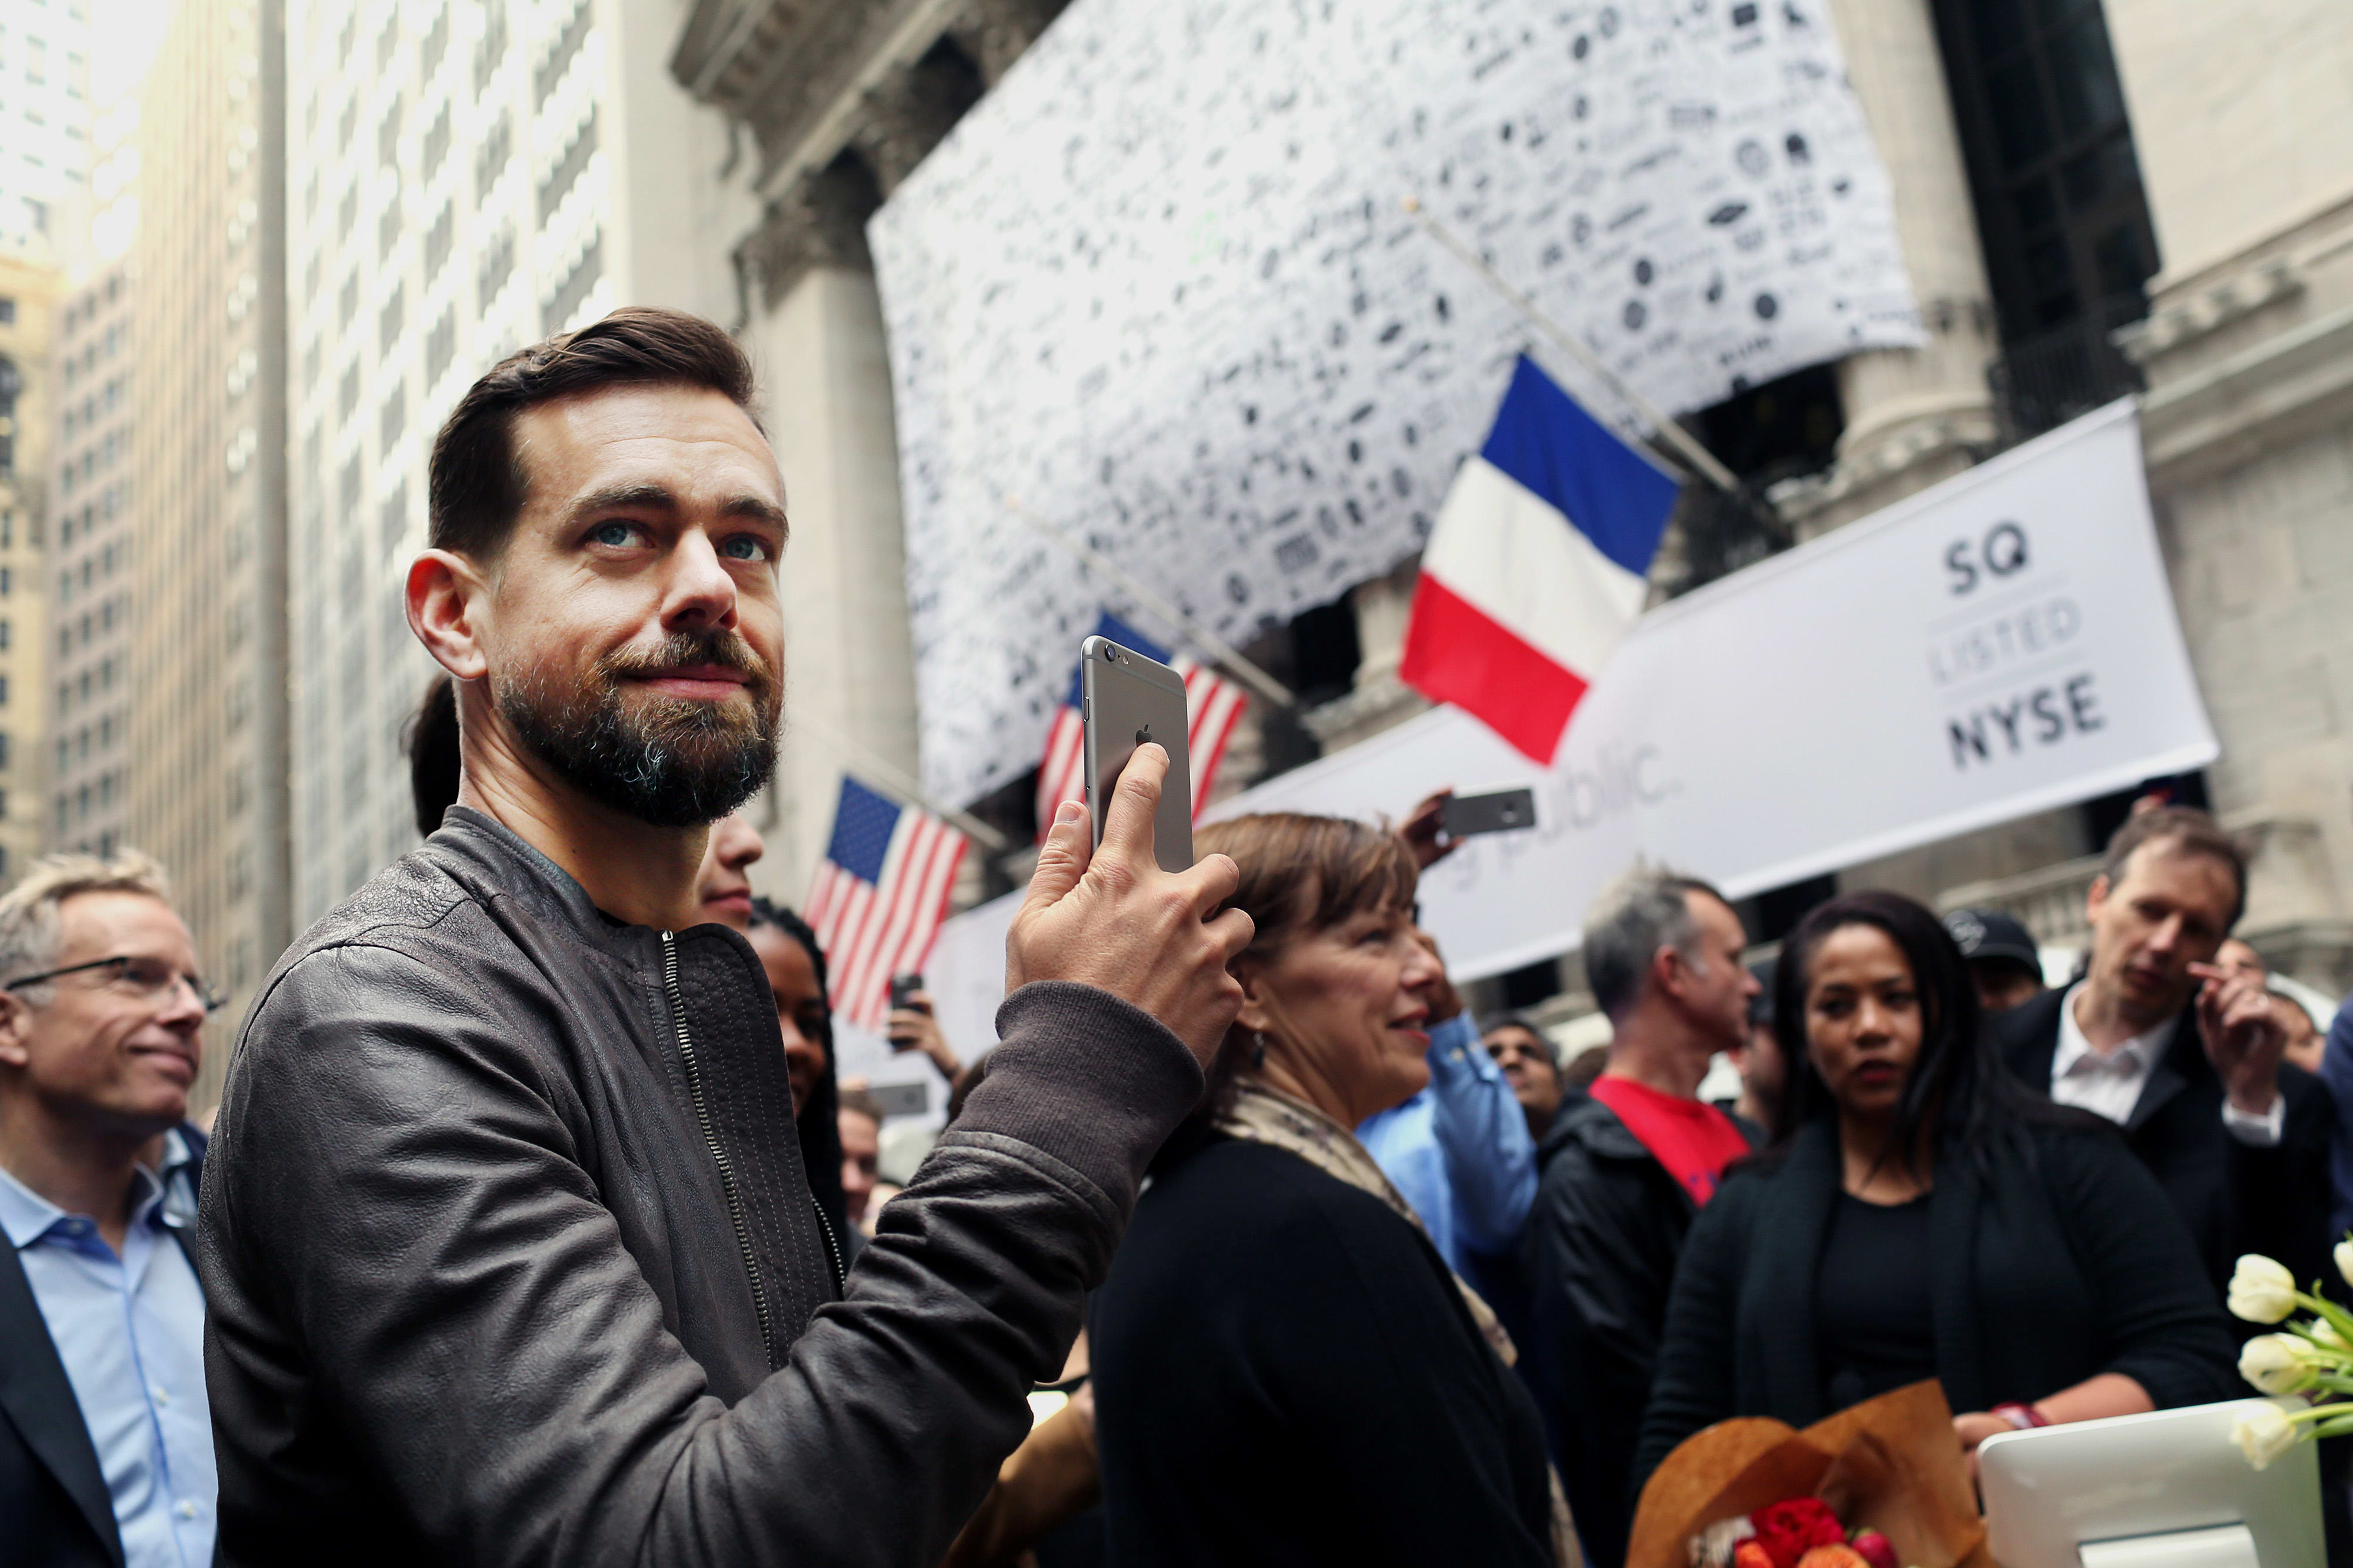 Twitter CEO Jack Dorsey says blocking New York Post story was 'wrong'